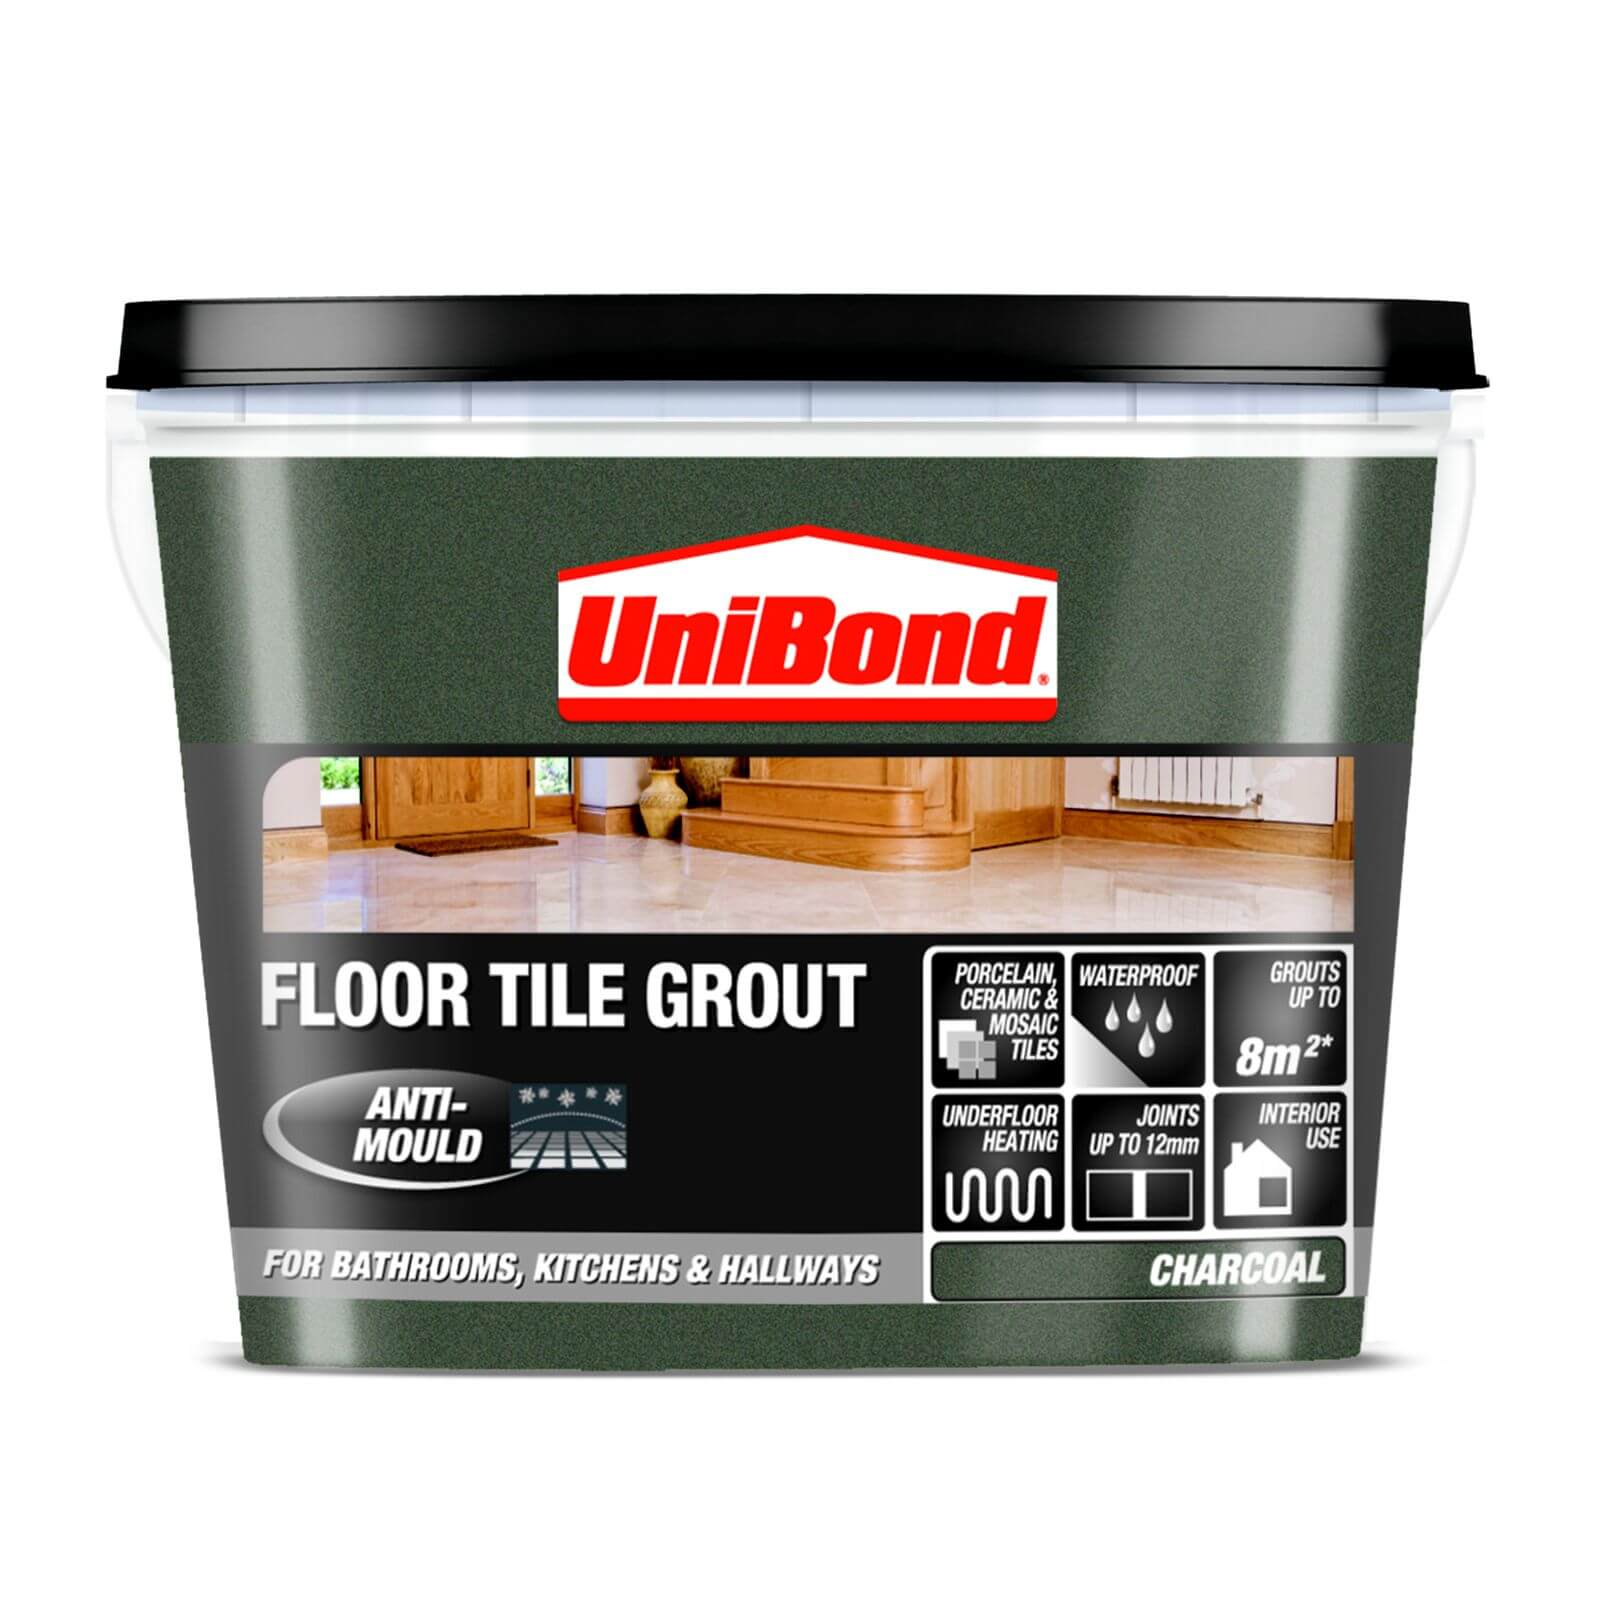 Unibond Ready Mixed Floor Grout Charcoal Grey - 3.75kg